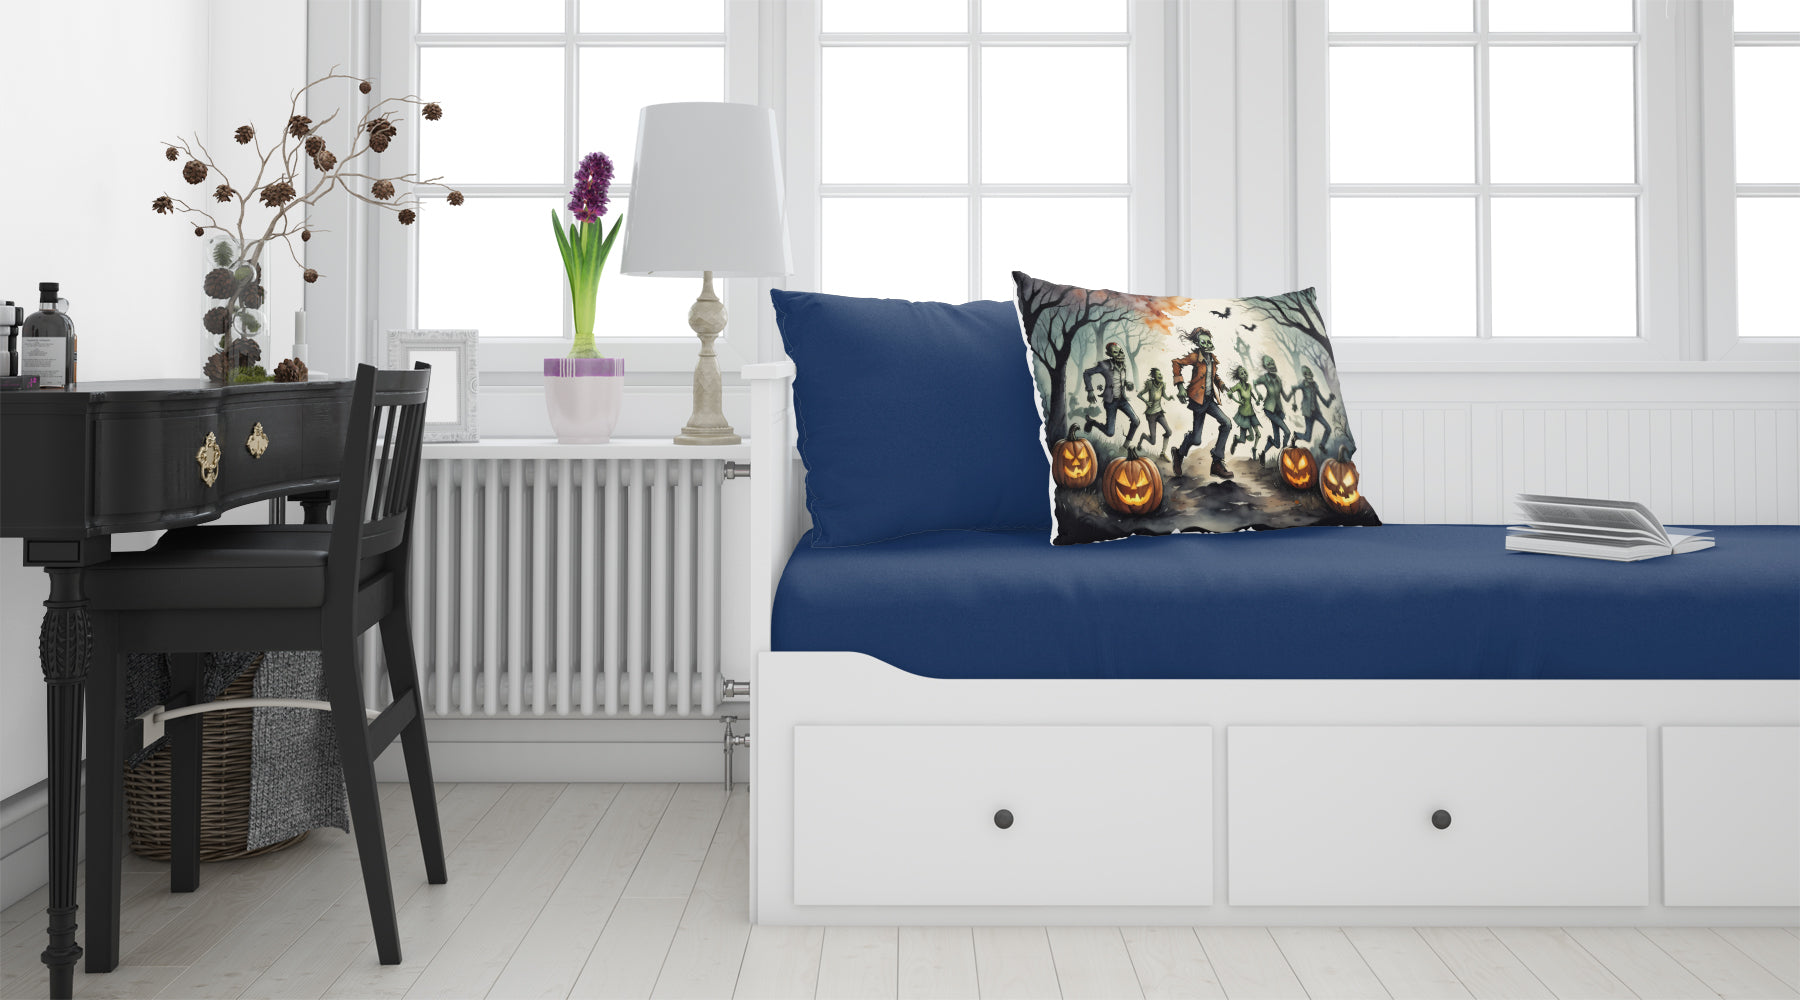 Buy this Zombies Spooky Halloween Fabric Standard Pillowcase